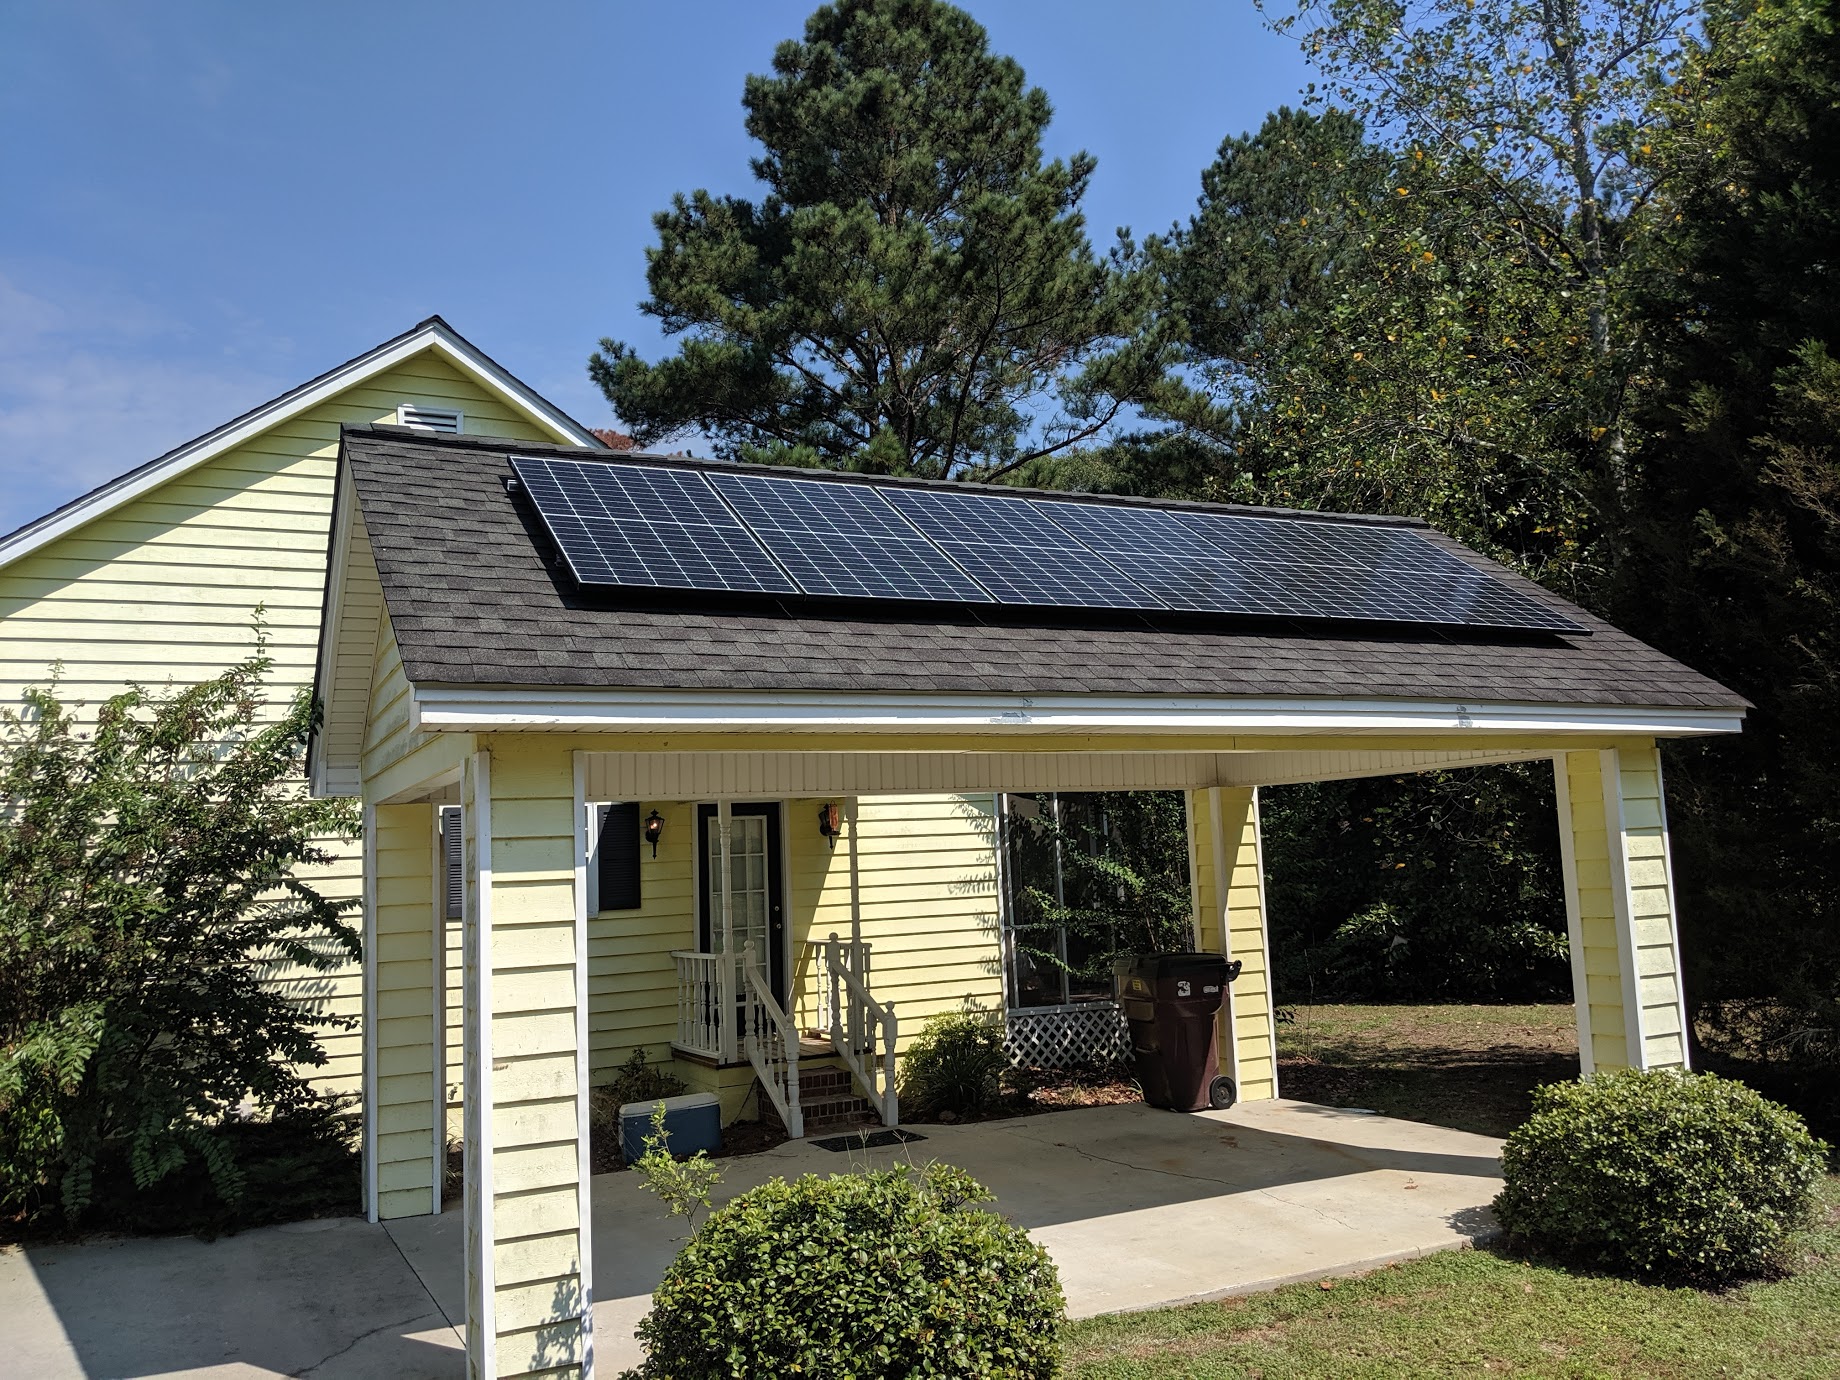 Image 4 - A grid tie system with battery backup made this small home in Moultrie, Georgia NetZero!